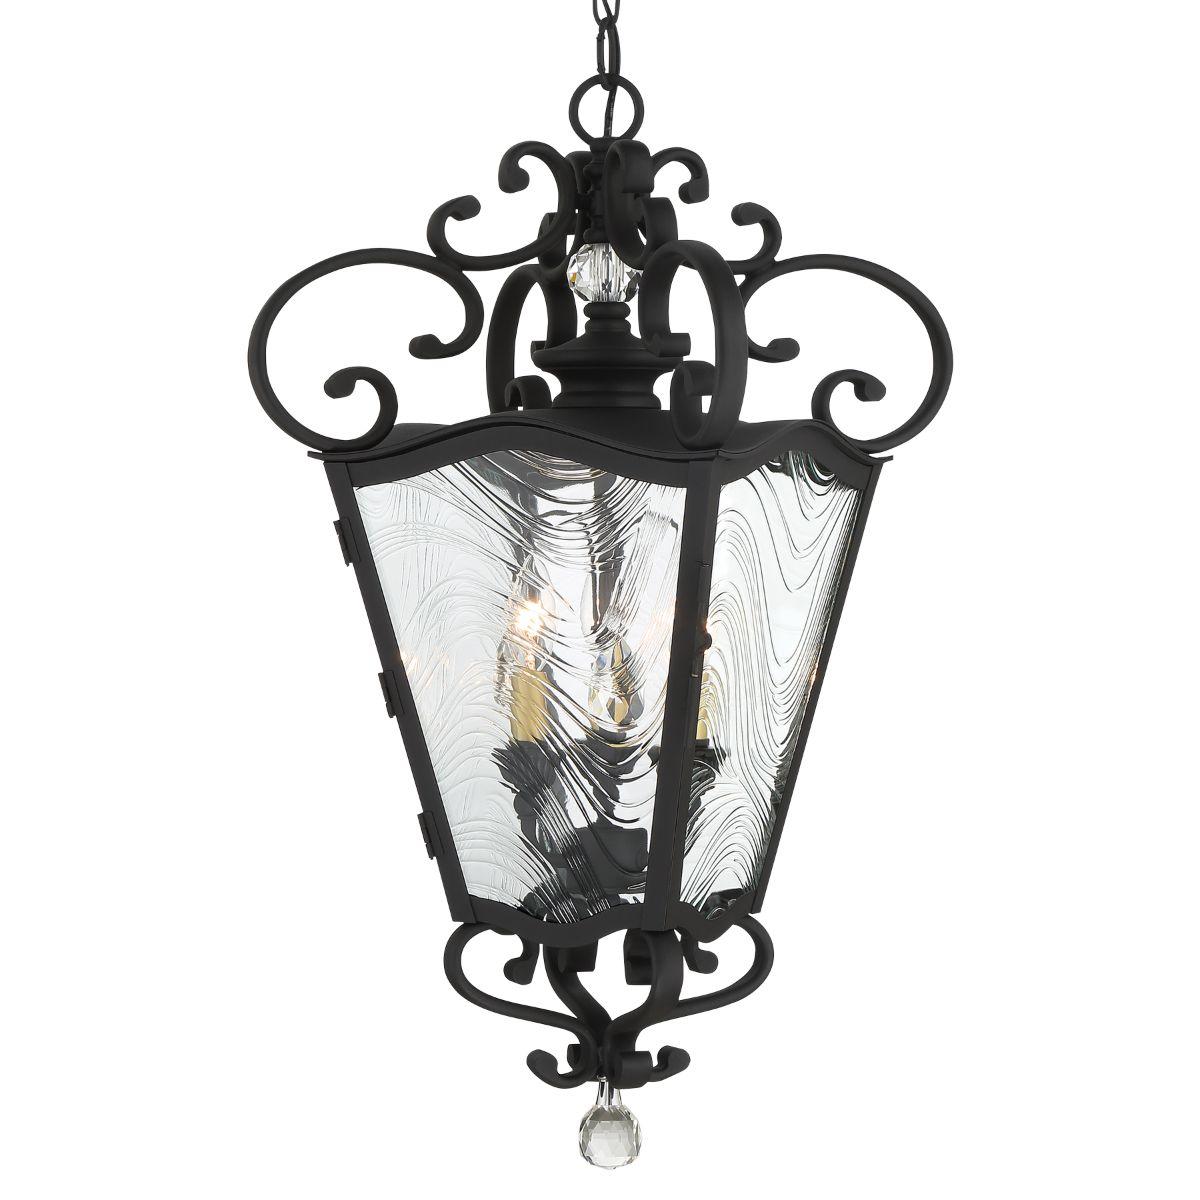 Brixton Ivey 3 lights 13 in. Outdoor Hanging Lantern Coal & Soft Brass finish